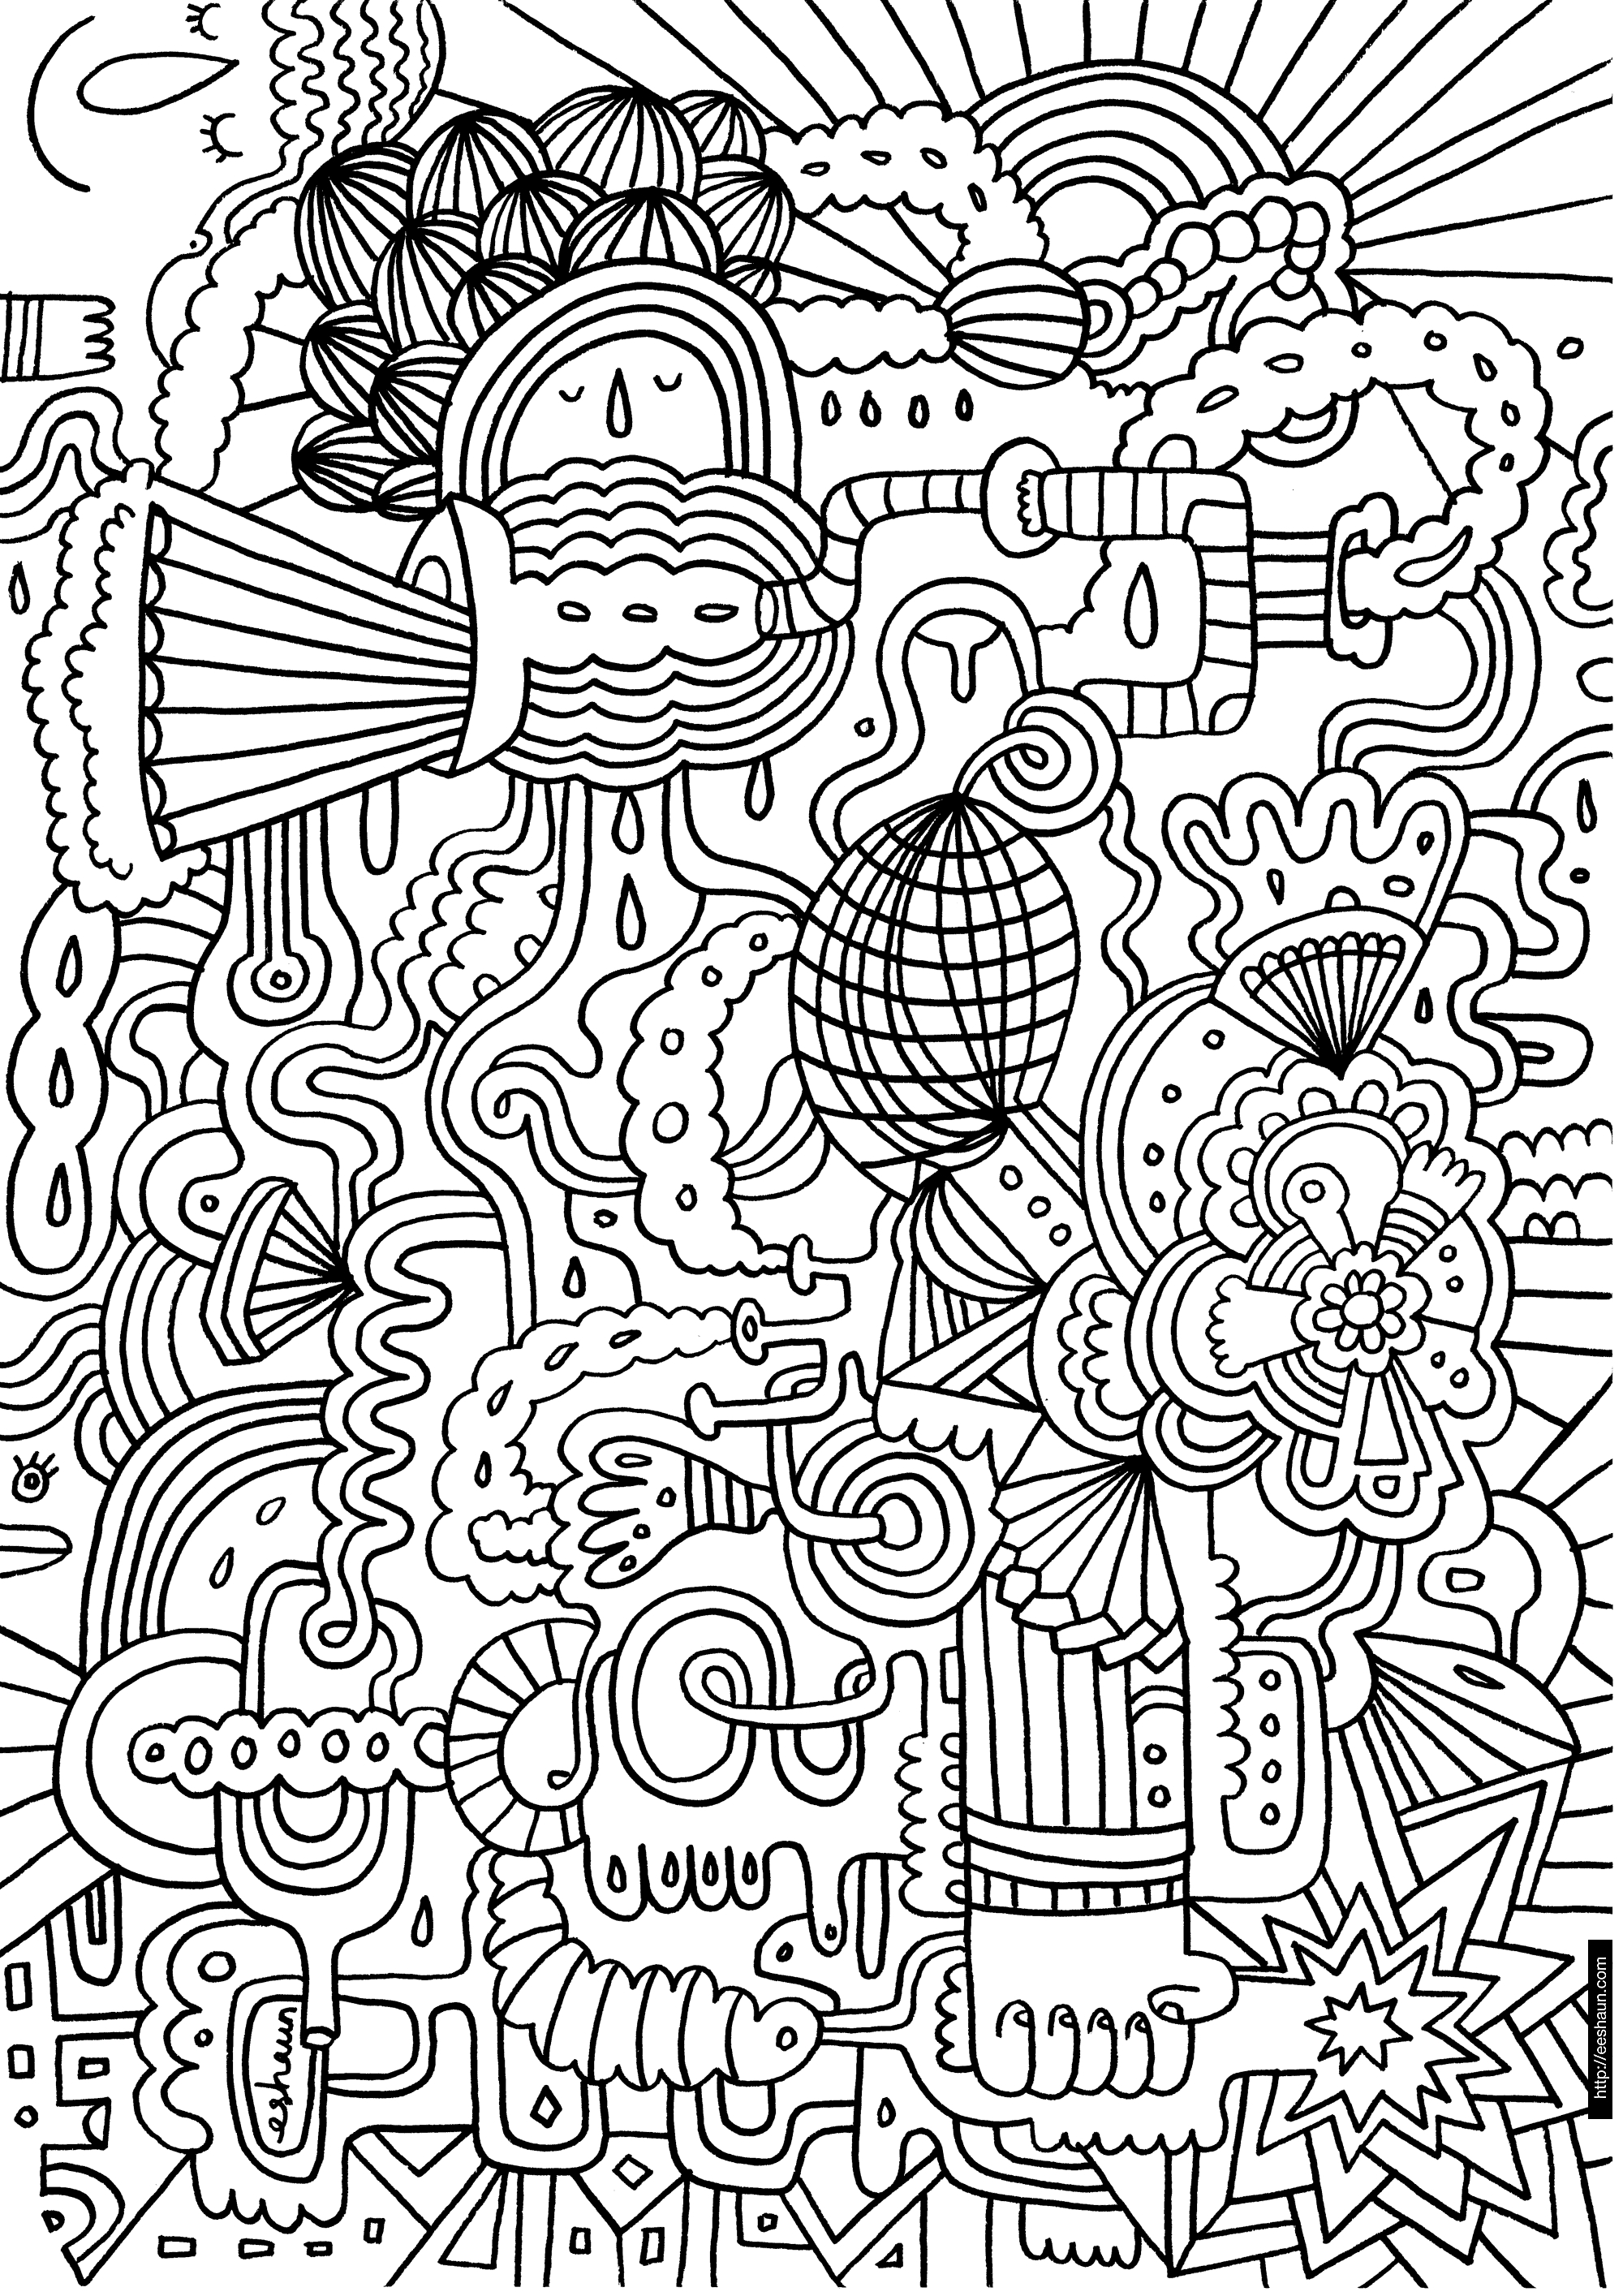 Hard Coloring Pages - Free Large Images | Adult Coloring Pages - Free Printable Hard Coloring Pages For Adults